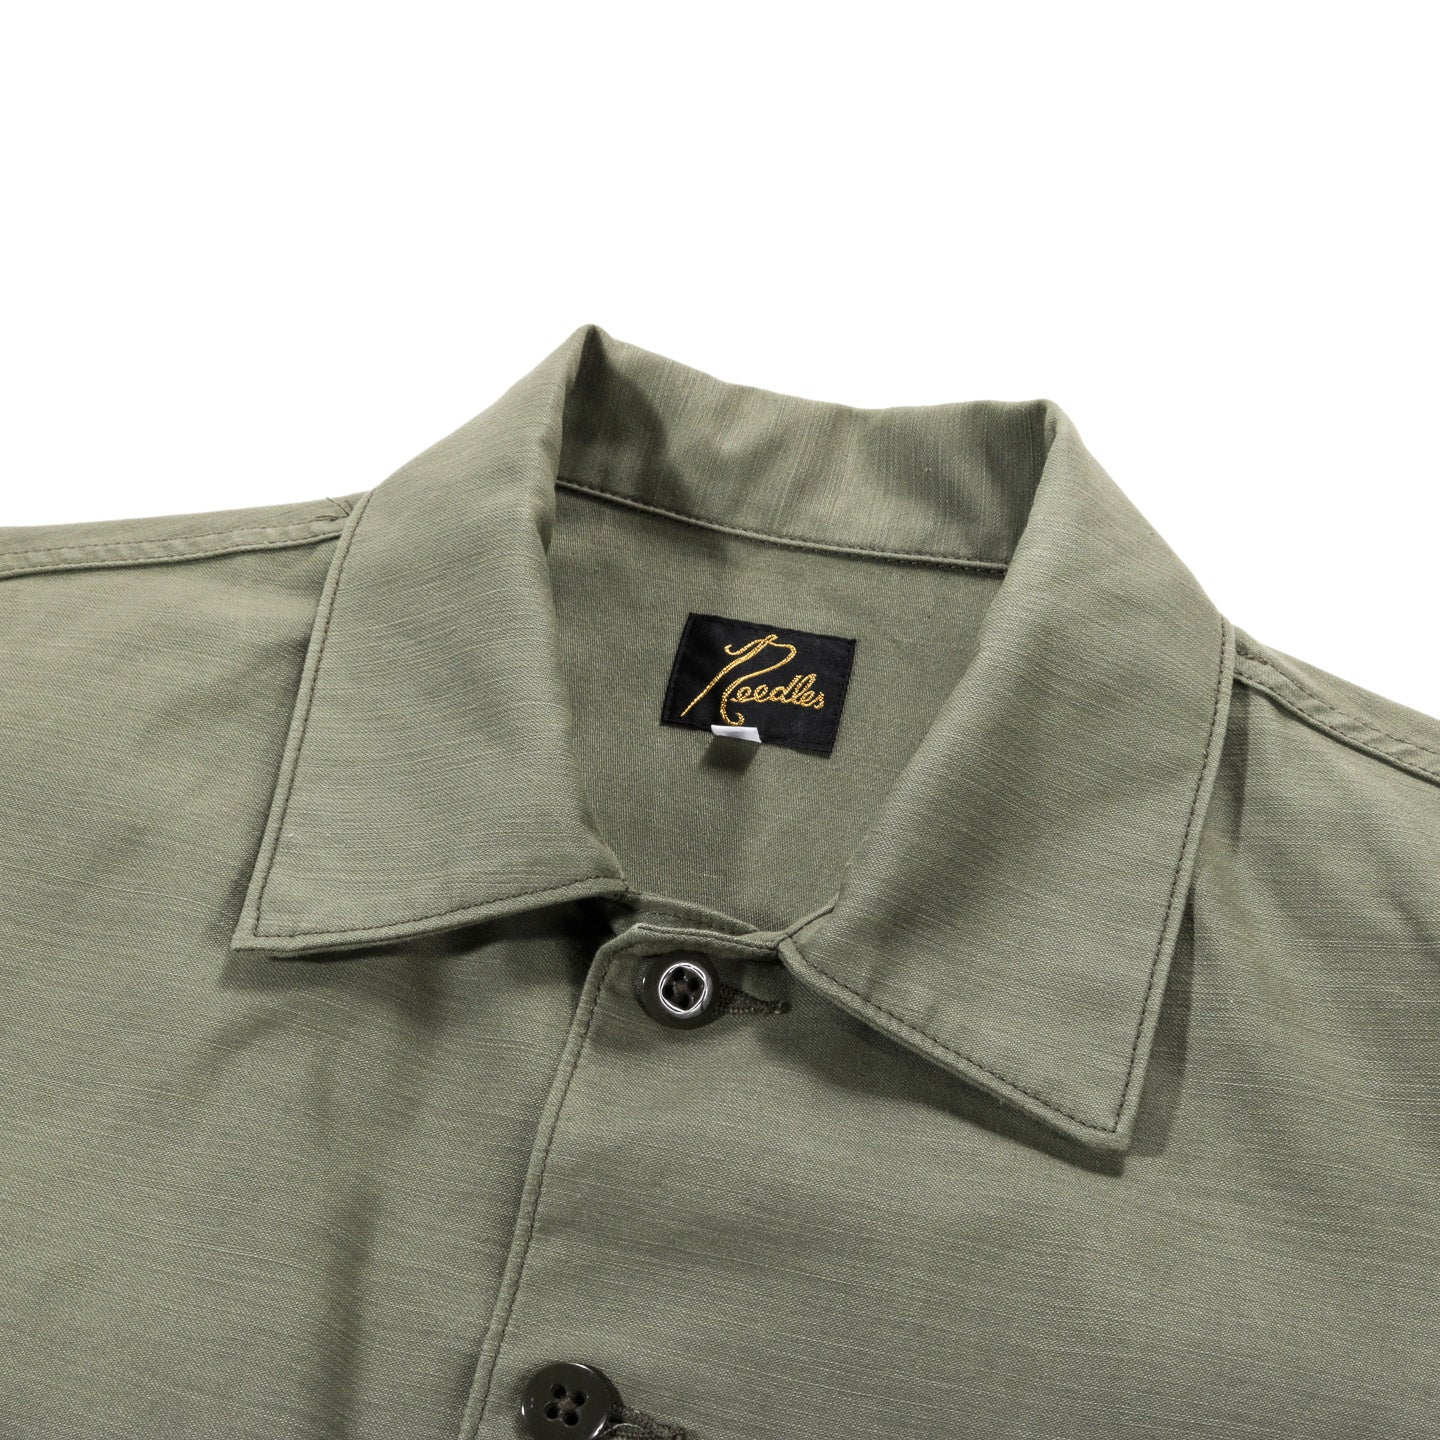 NEEDLES S/S FATIGUE SHIRT BACK SATEEN OLIVE   TODAY CLOTHING